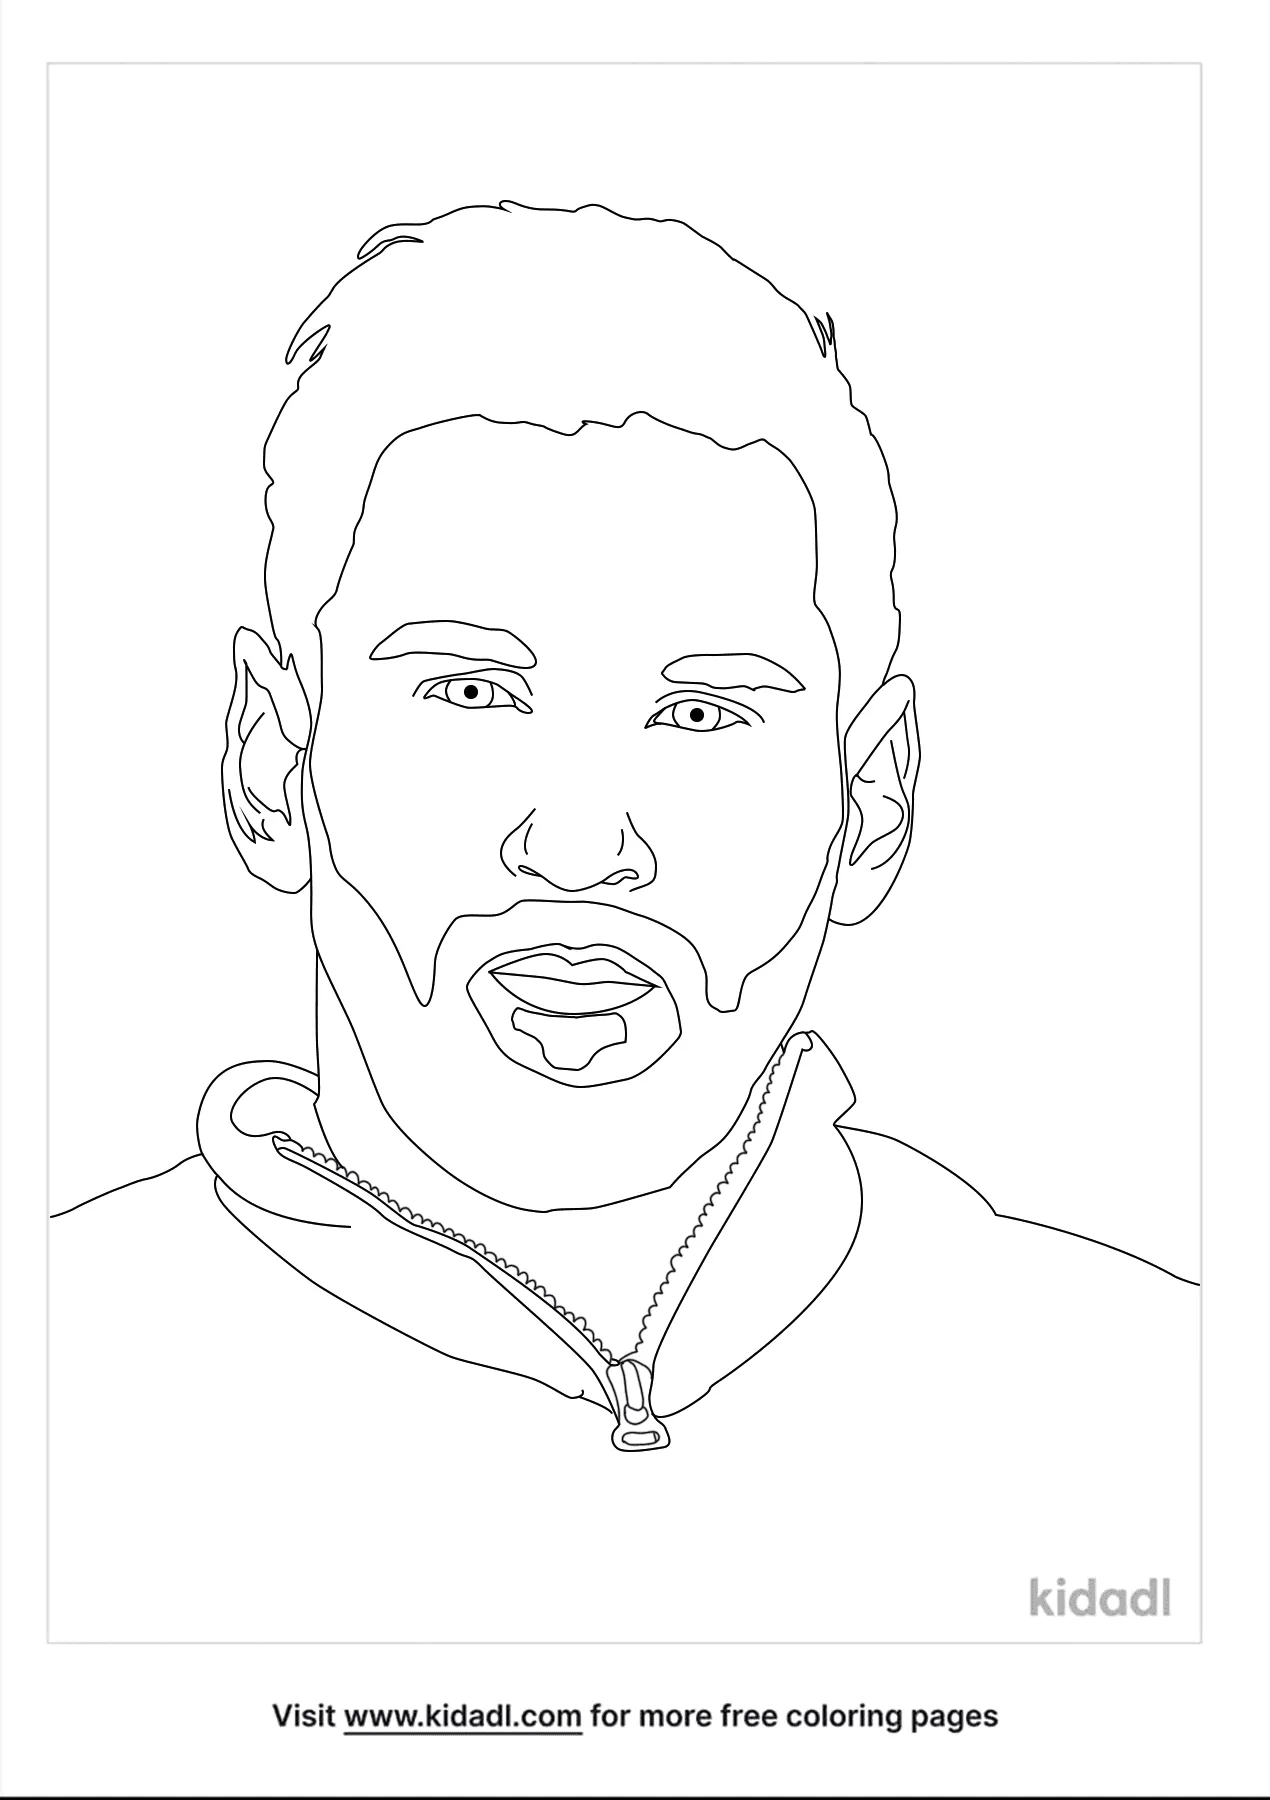 Lionel Messi Coloring Page | Free Famous Coloring Page | Kidadl